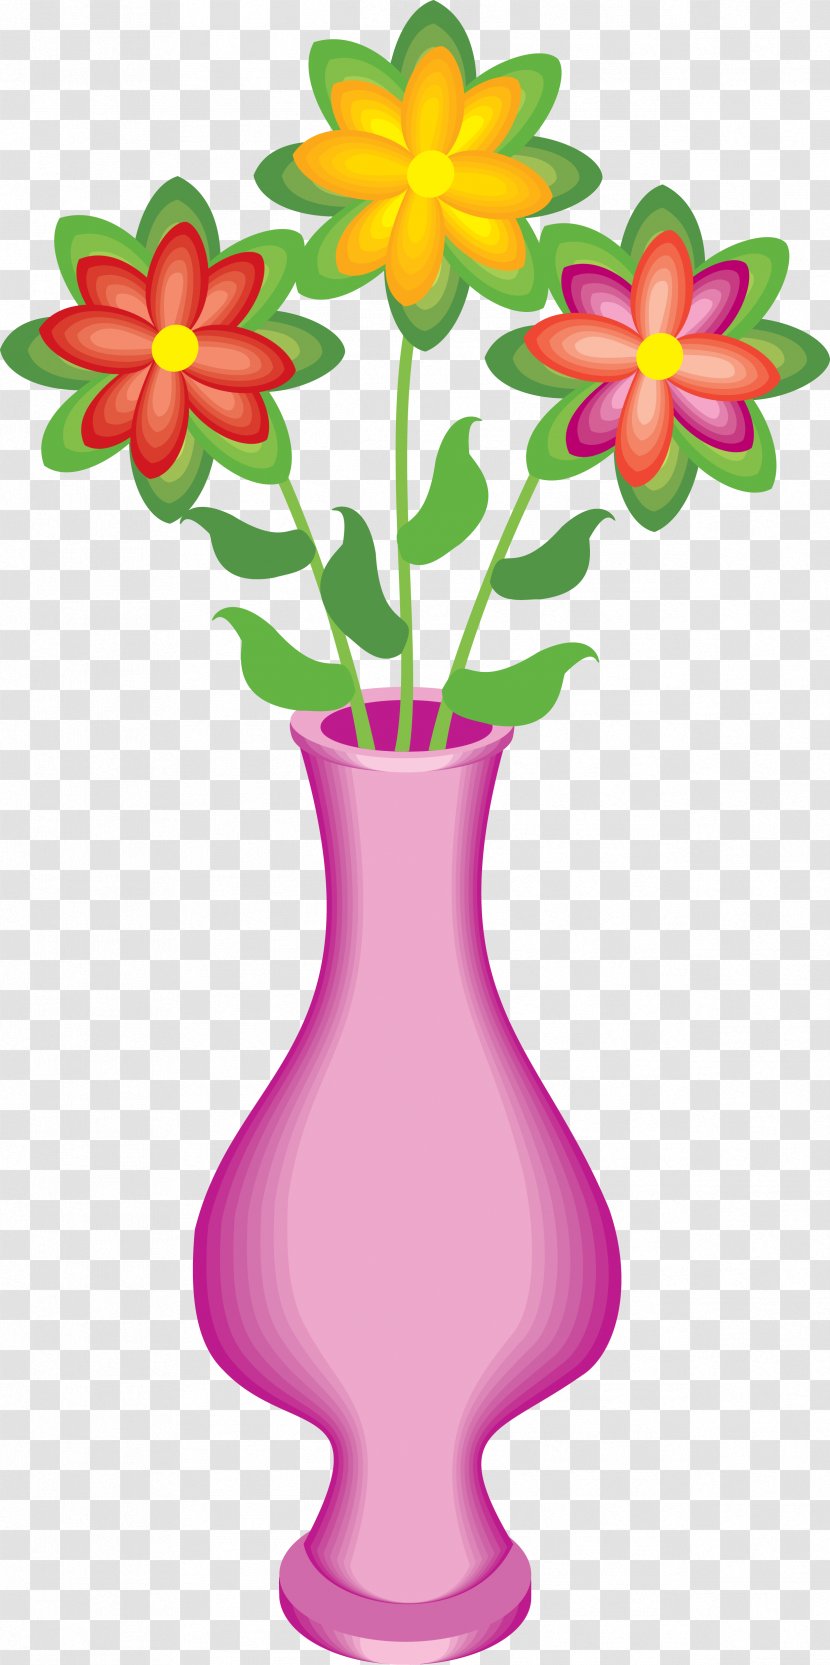 Flower Pot Coloring Page in JPG, PDF, EPS - Download | Template.net